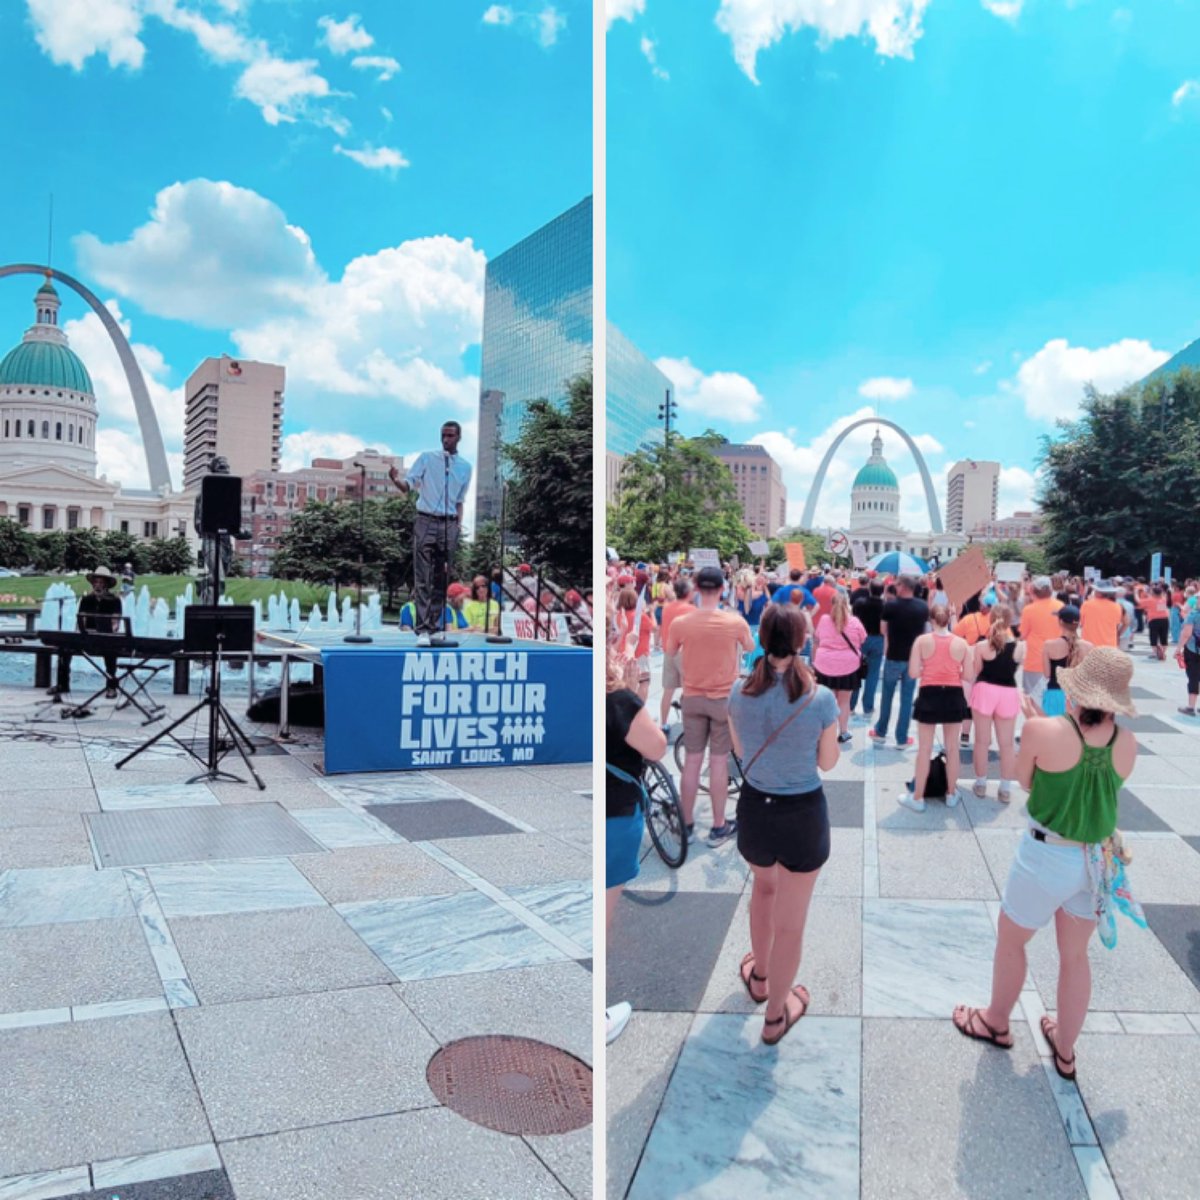 There is so much we can achieve when we come together to say Enough is Enough! Thank you @RayReedMO and everyone that came out today! #STLProud #MarchForOurLivesJune11 #MarchForOurLivesSTL #Progress